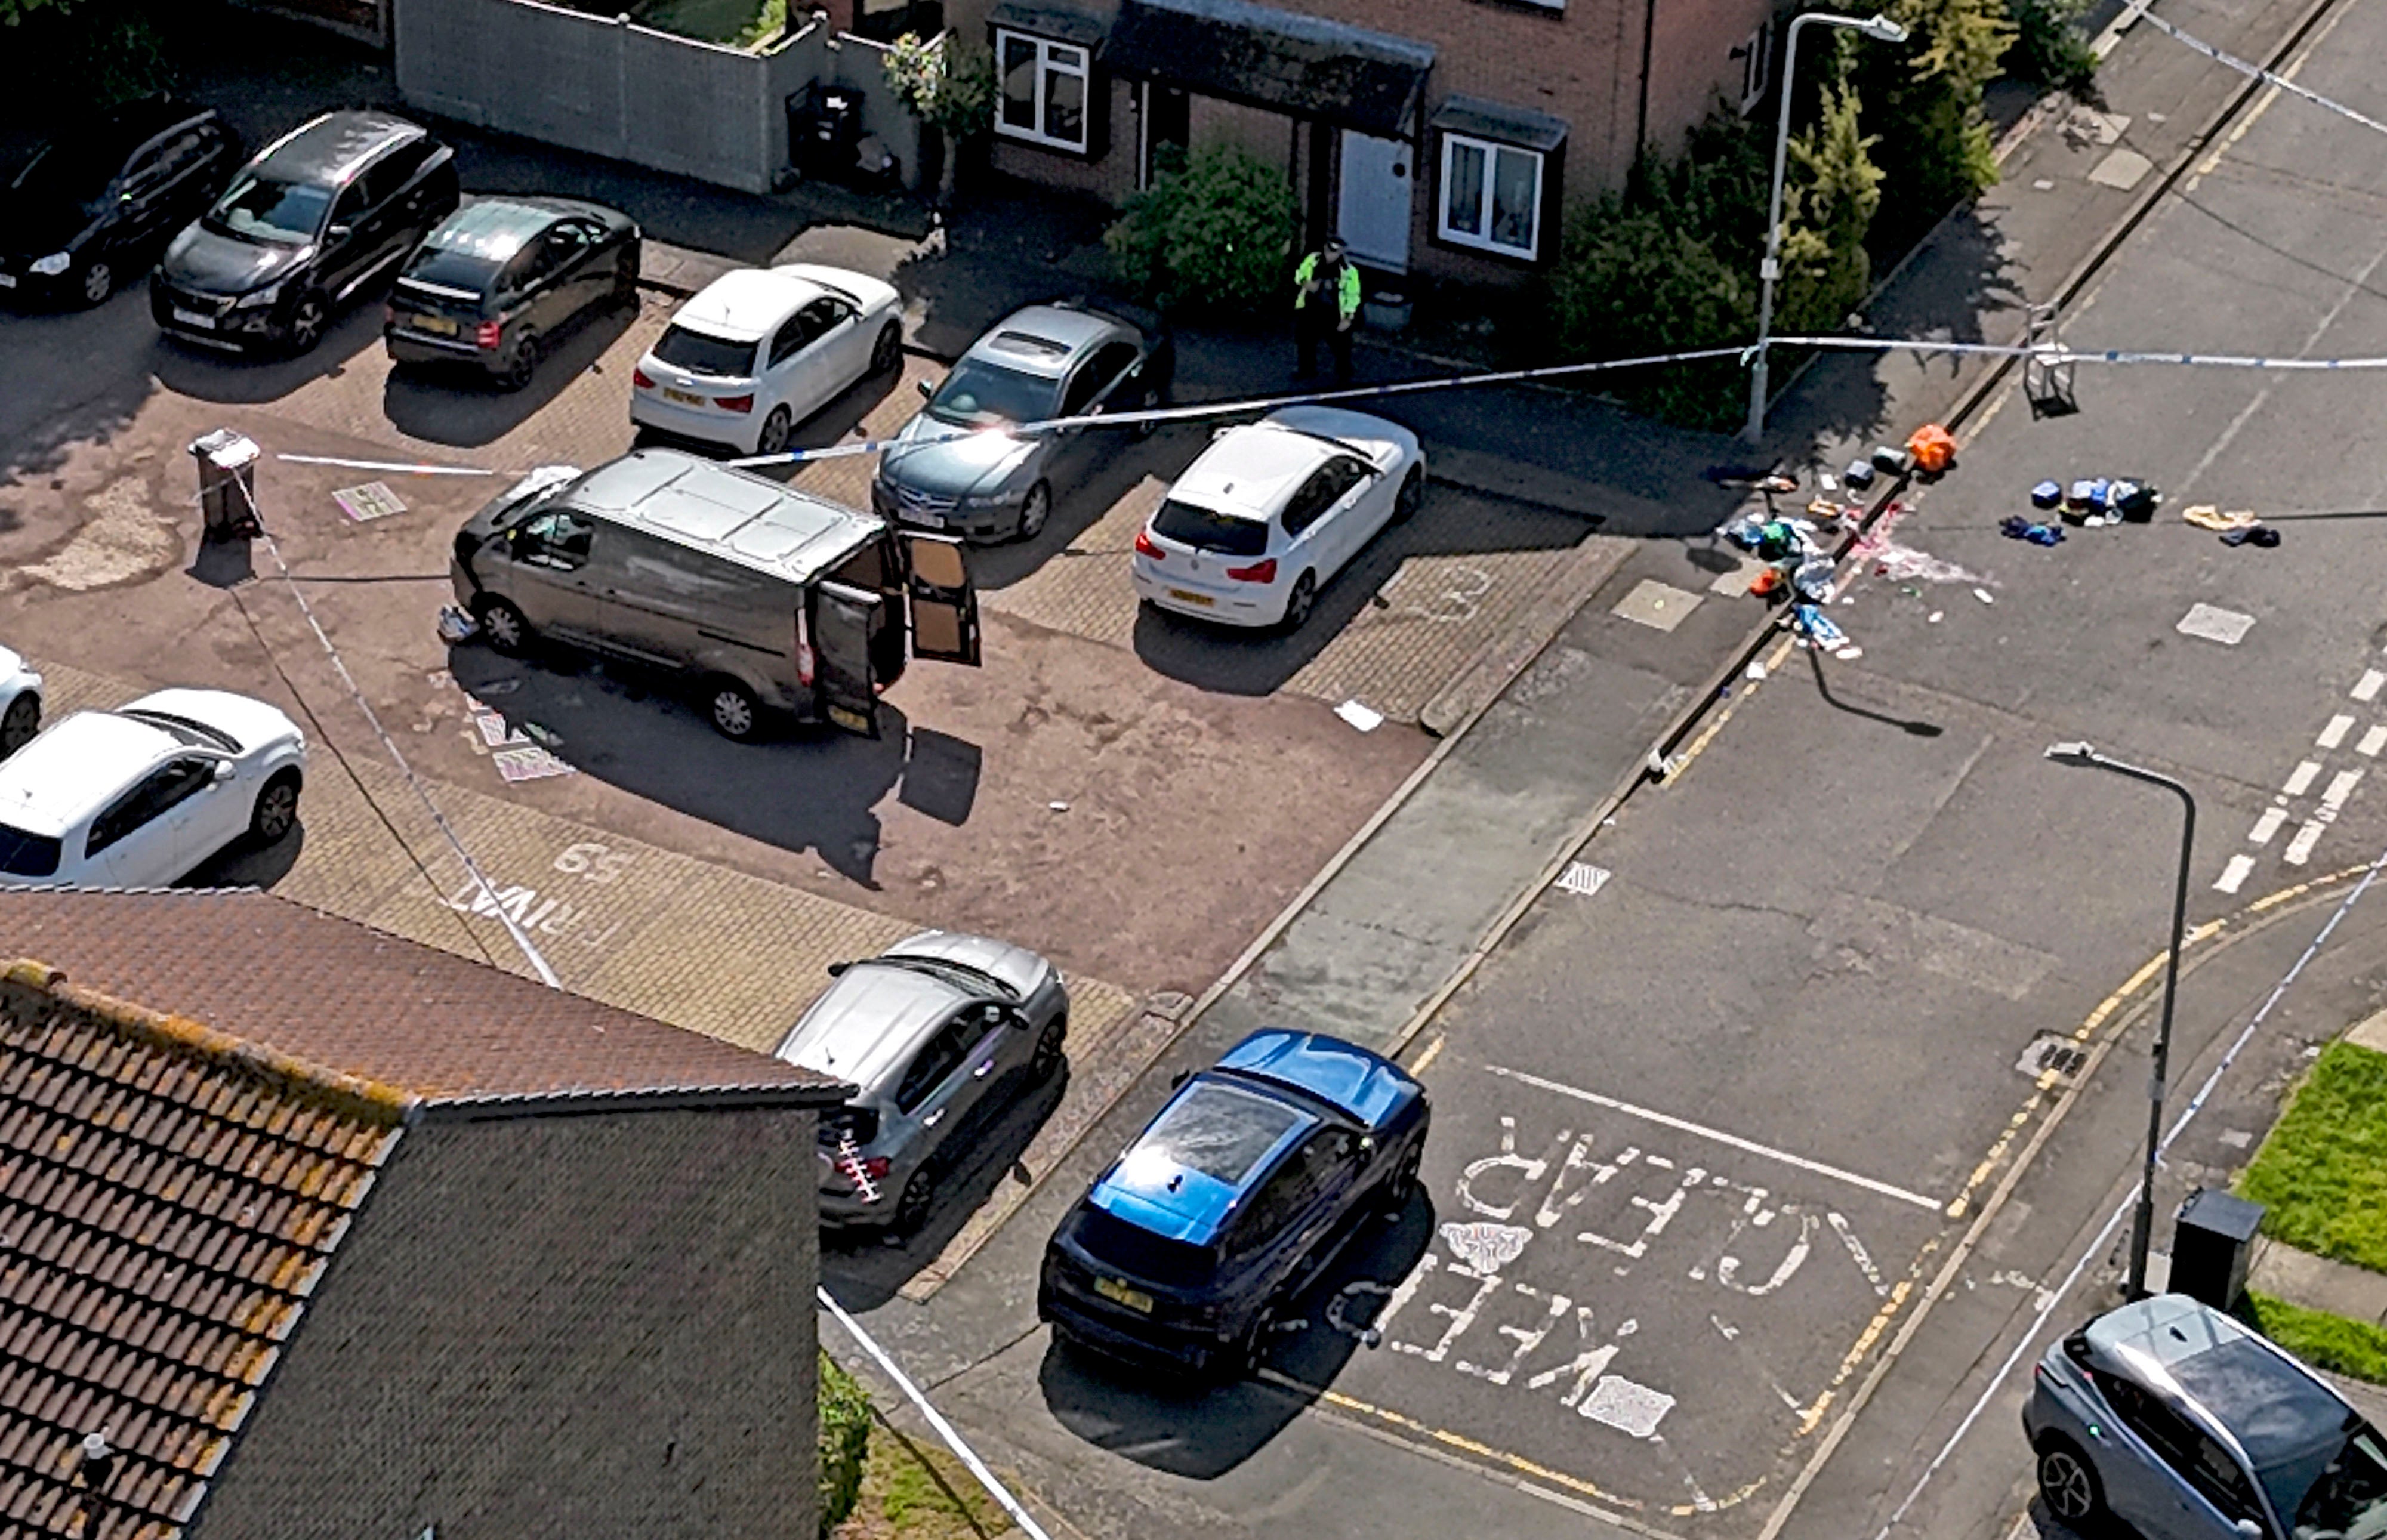 Police tape around a van on Laing Close in Hainault, east London following reported stabbings and attacks on police officers